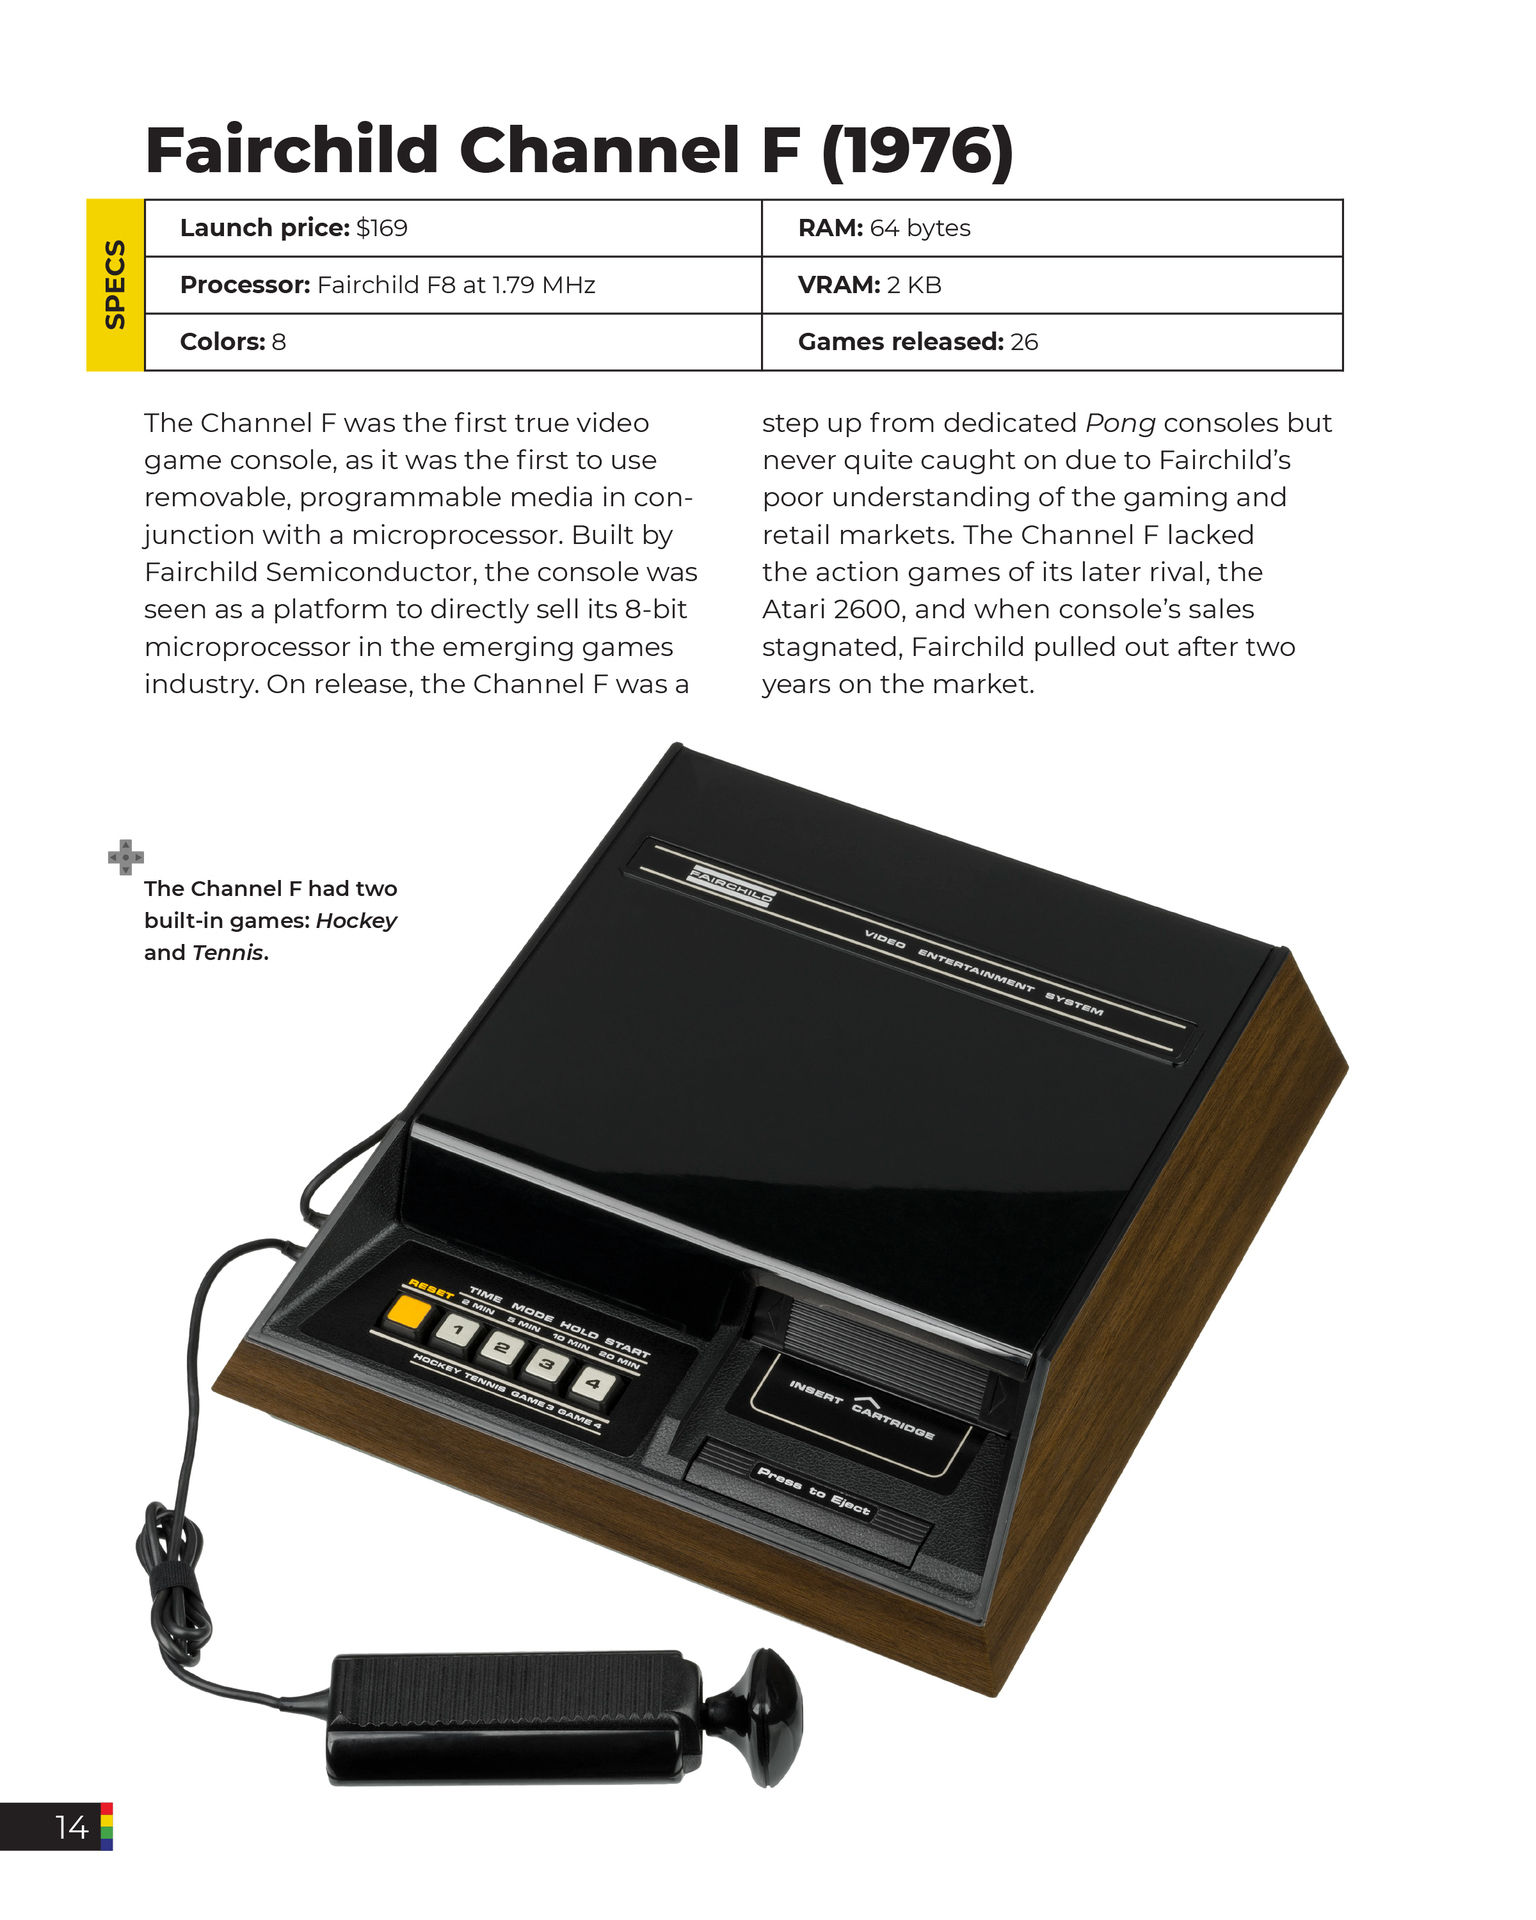 The game console a photographic history from Atari to Xbox - photo 27